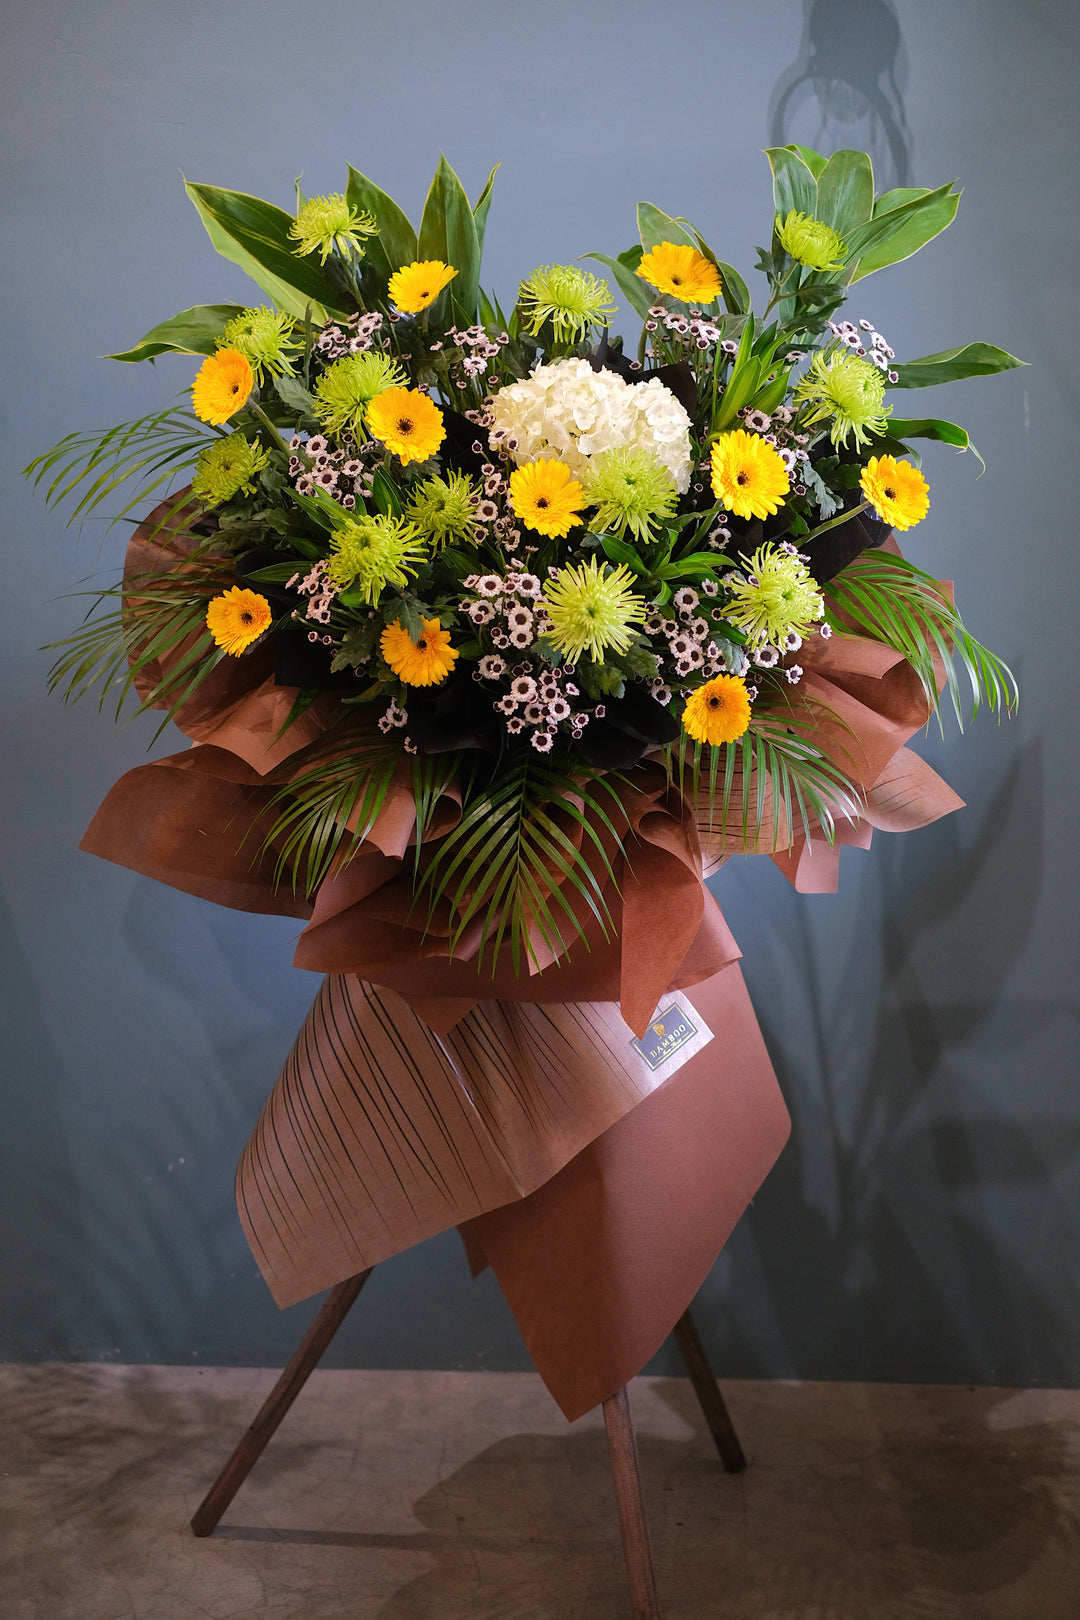 Design of the week of April, when words leave you, express your sympathy and condolence the traditional way by sending a floral tribute to honor the memory of a loved one, relative or friend. For same day condolences flowers delivery in Penang.  